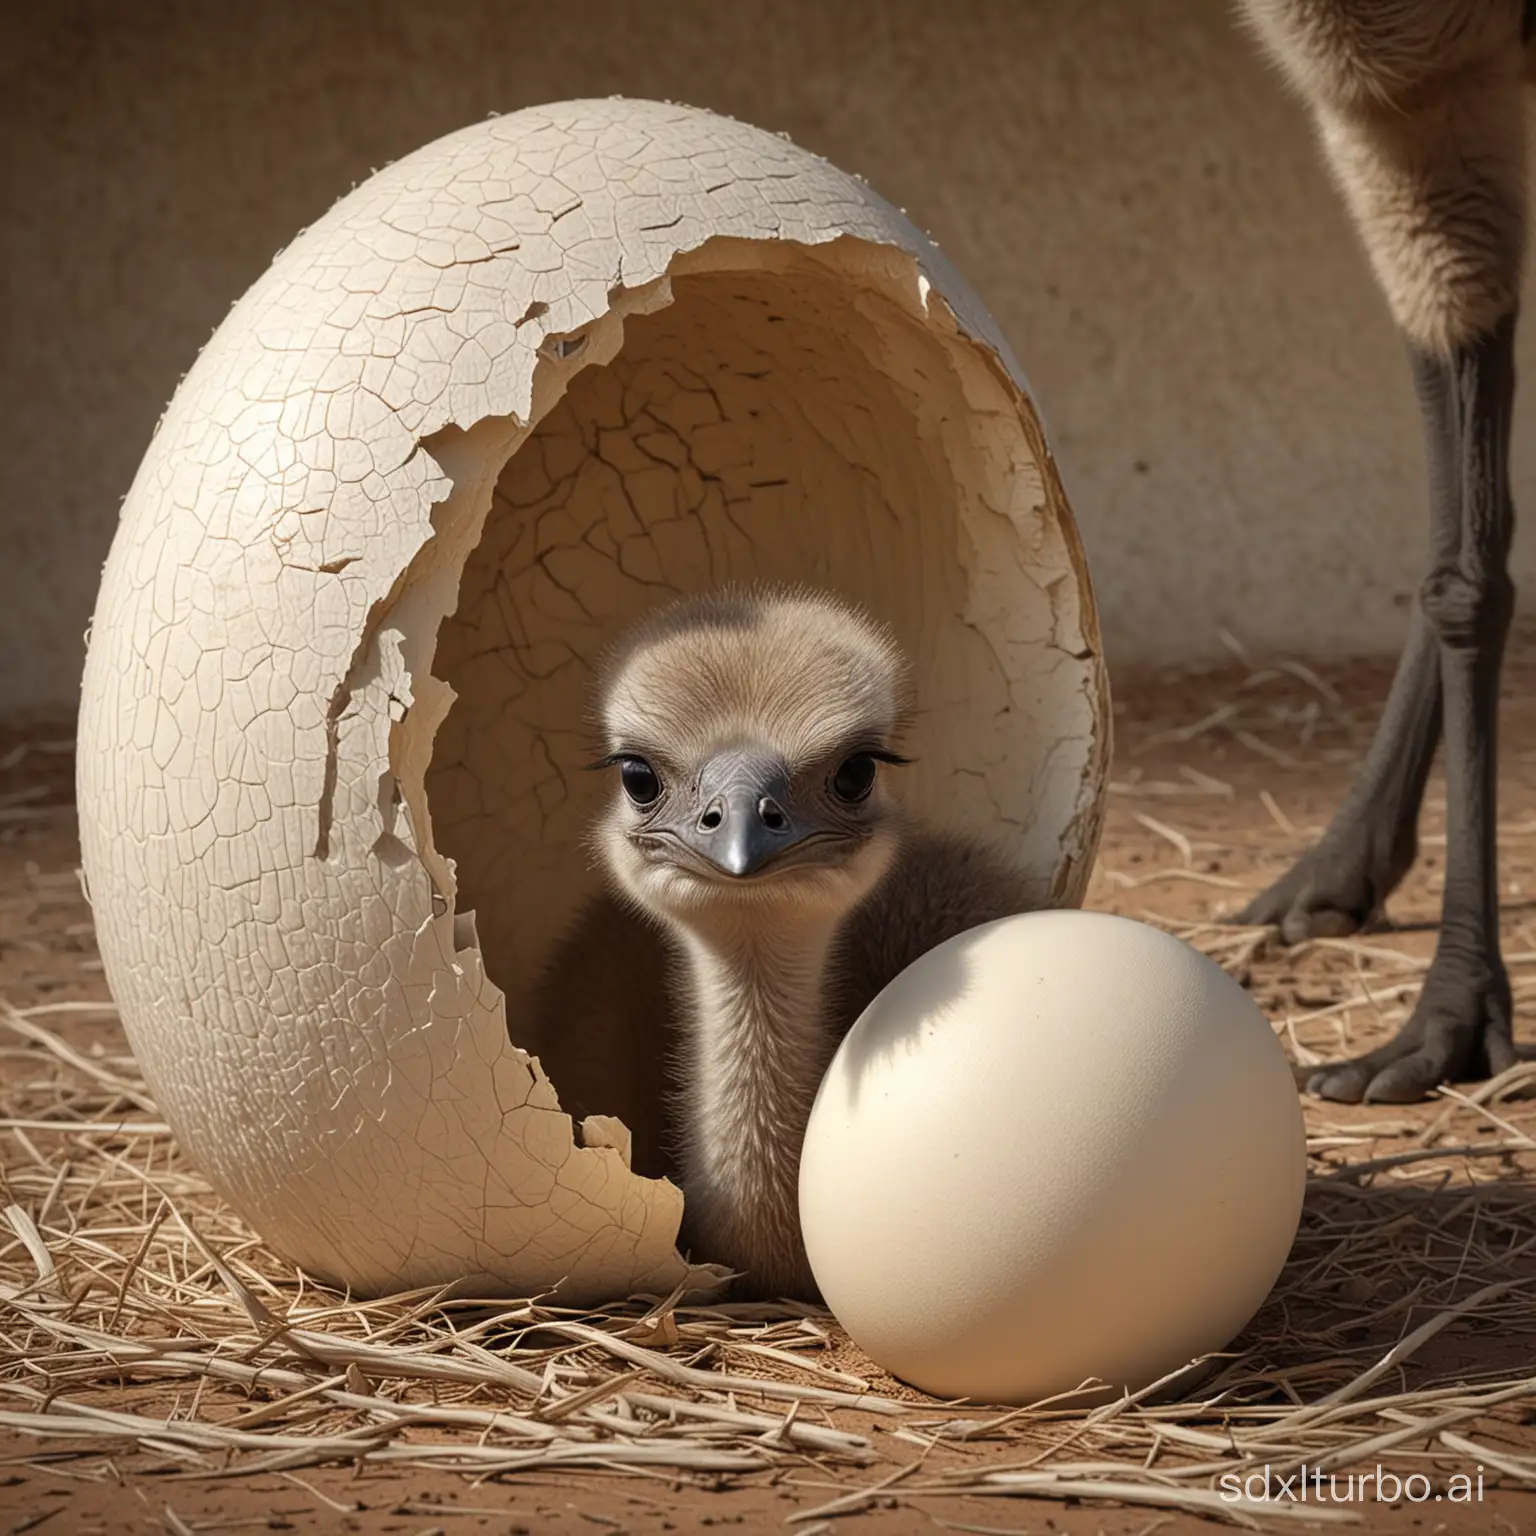 Newborn-Ostrich-Emerges-from-Cracked-Egg-in-Vibrant-Savannah-Scene